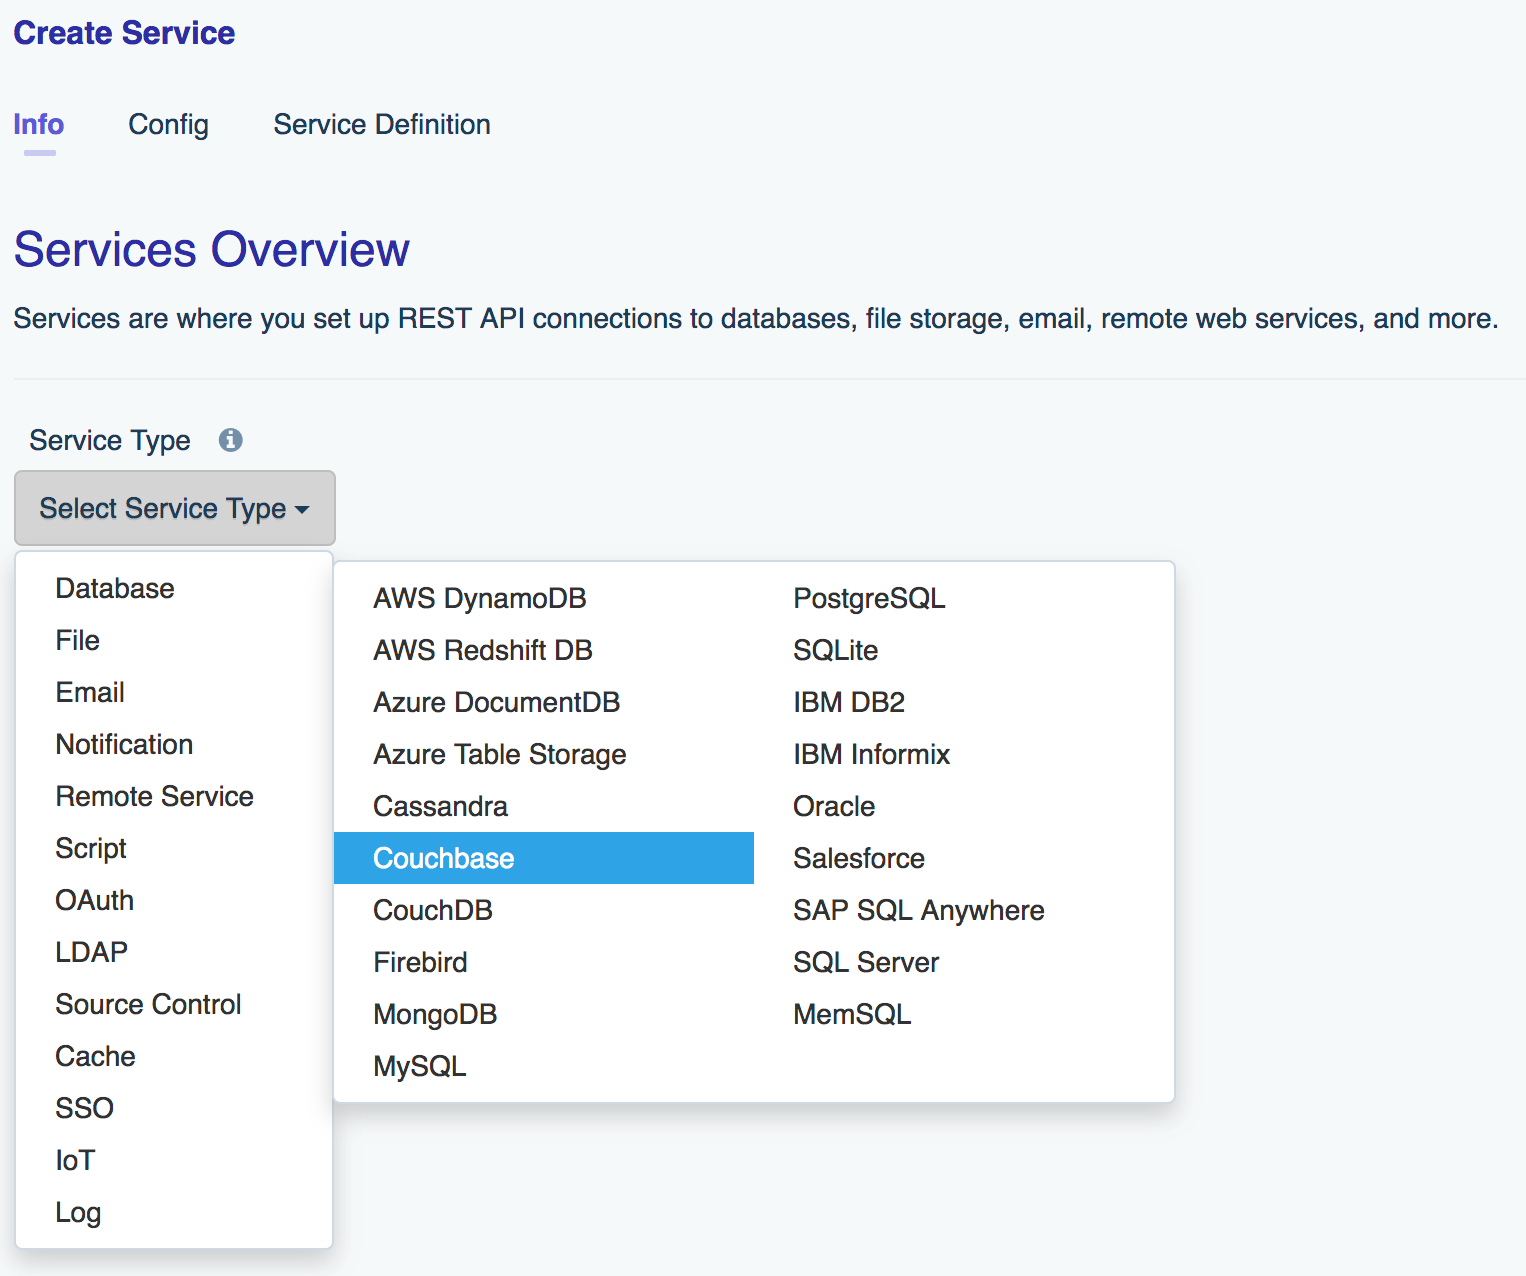 Select the Couchbase database service